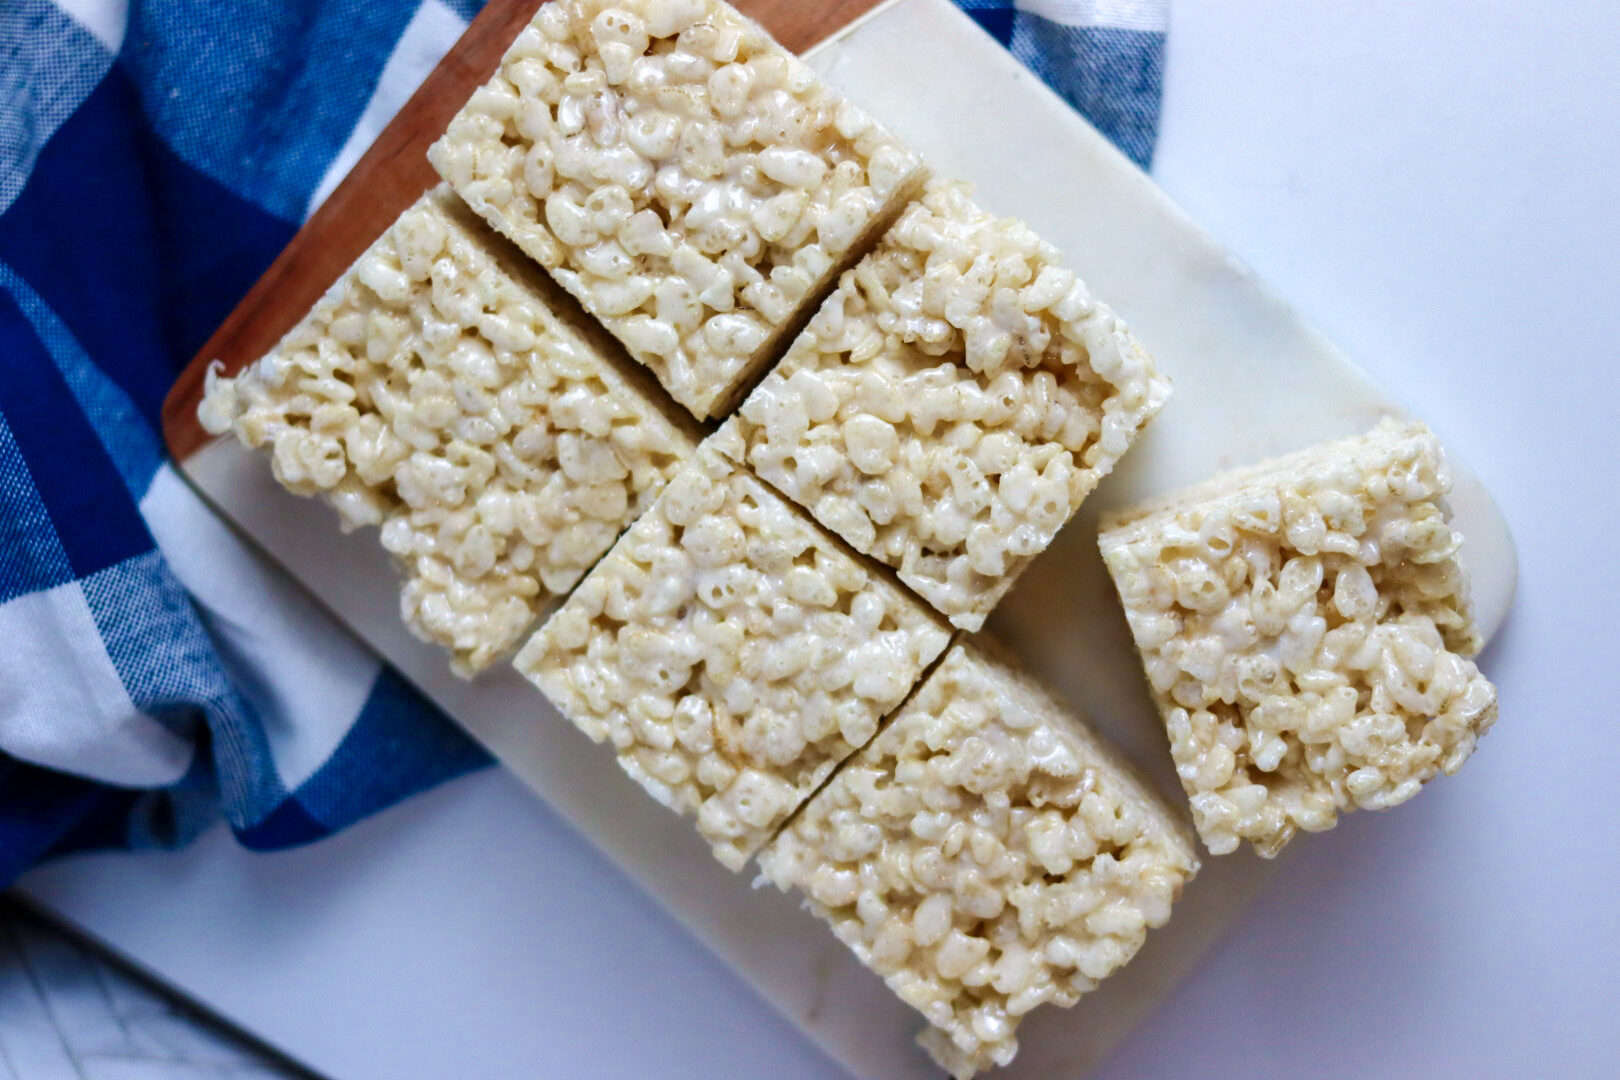 extra chewy rice crispy treats you’ll love !